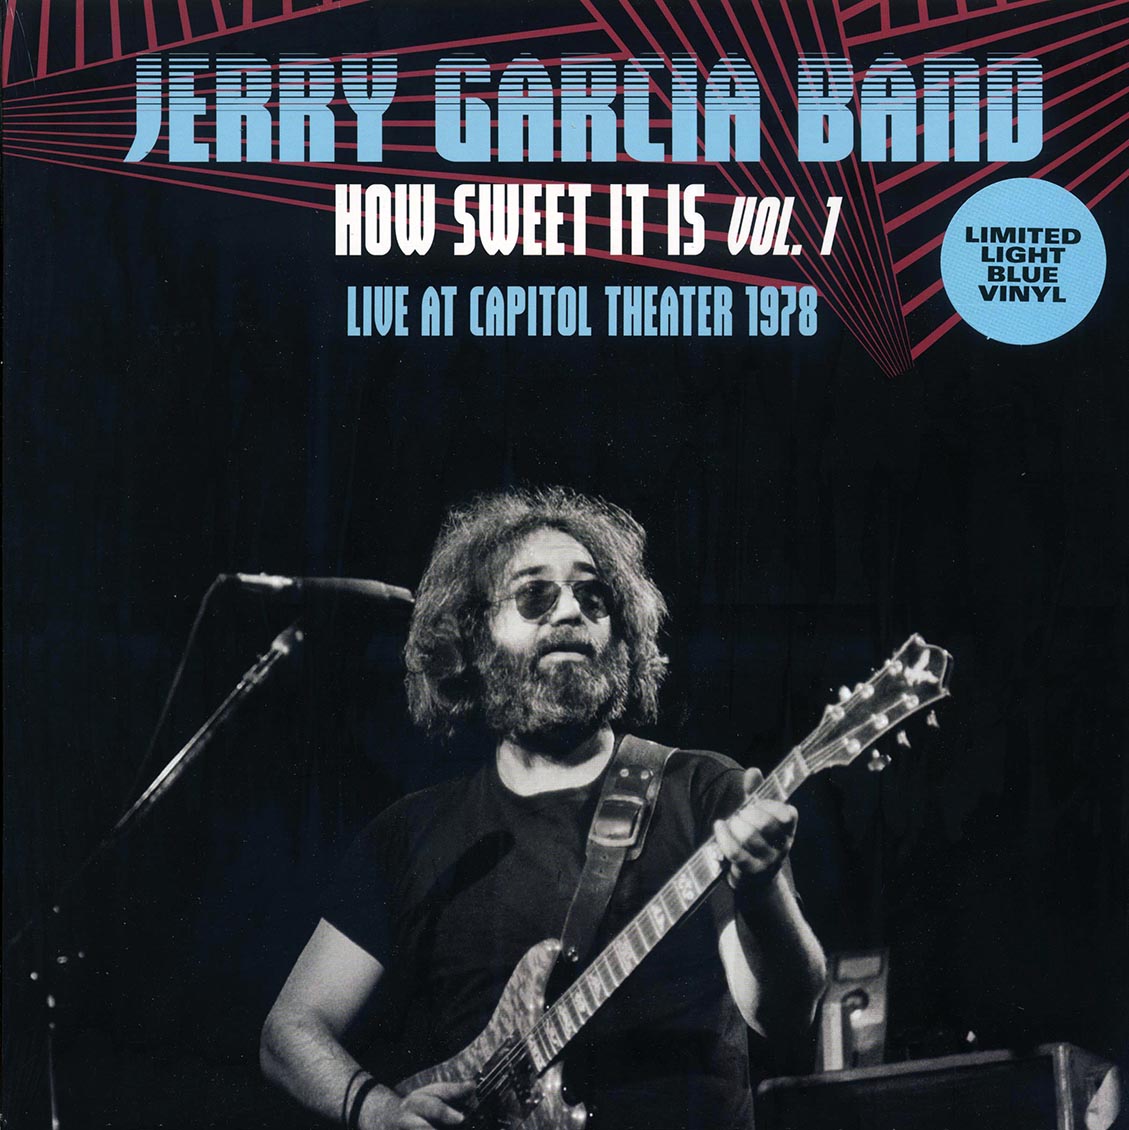 The Jerry Garcia Band - How Sweet It Is Volume 1: Live At Capitol Theater 1978 (ltd. ed.) (blue vinyl) - Vinyl LP